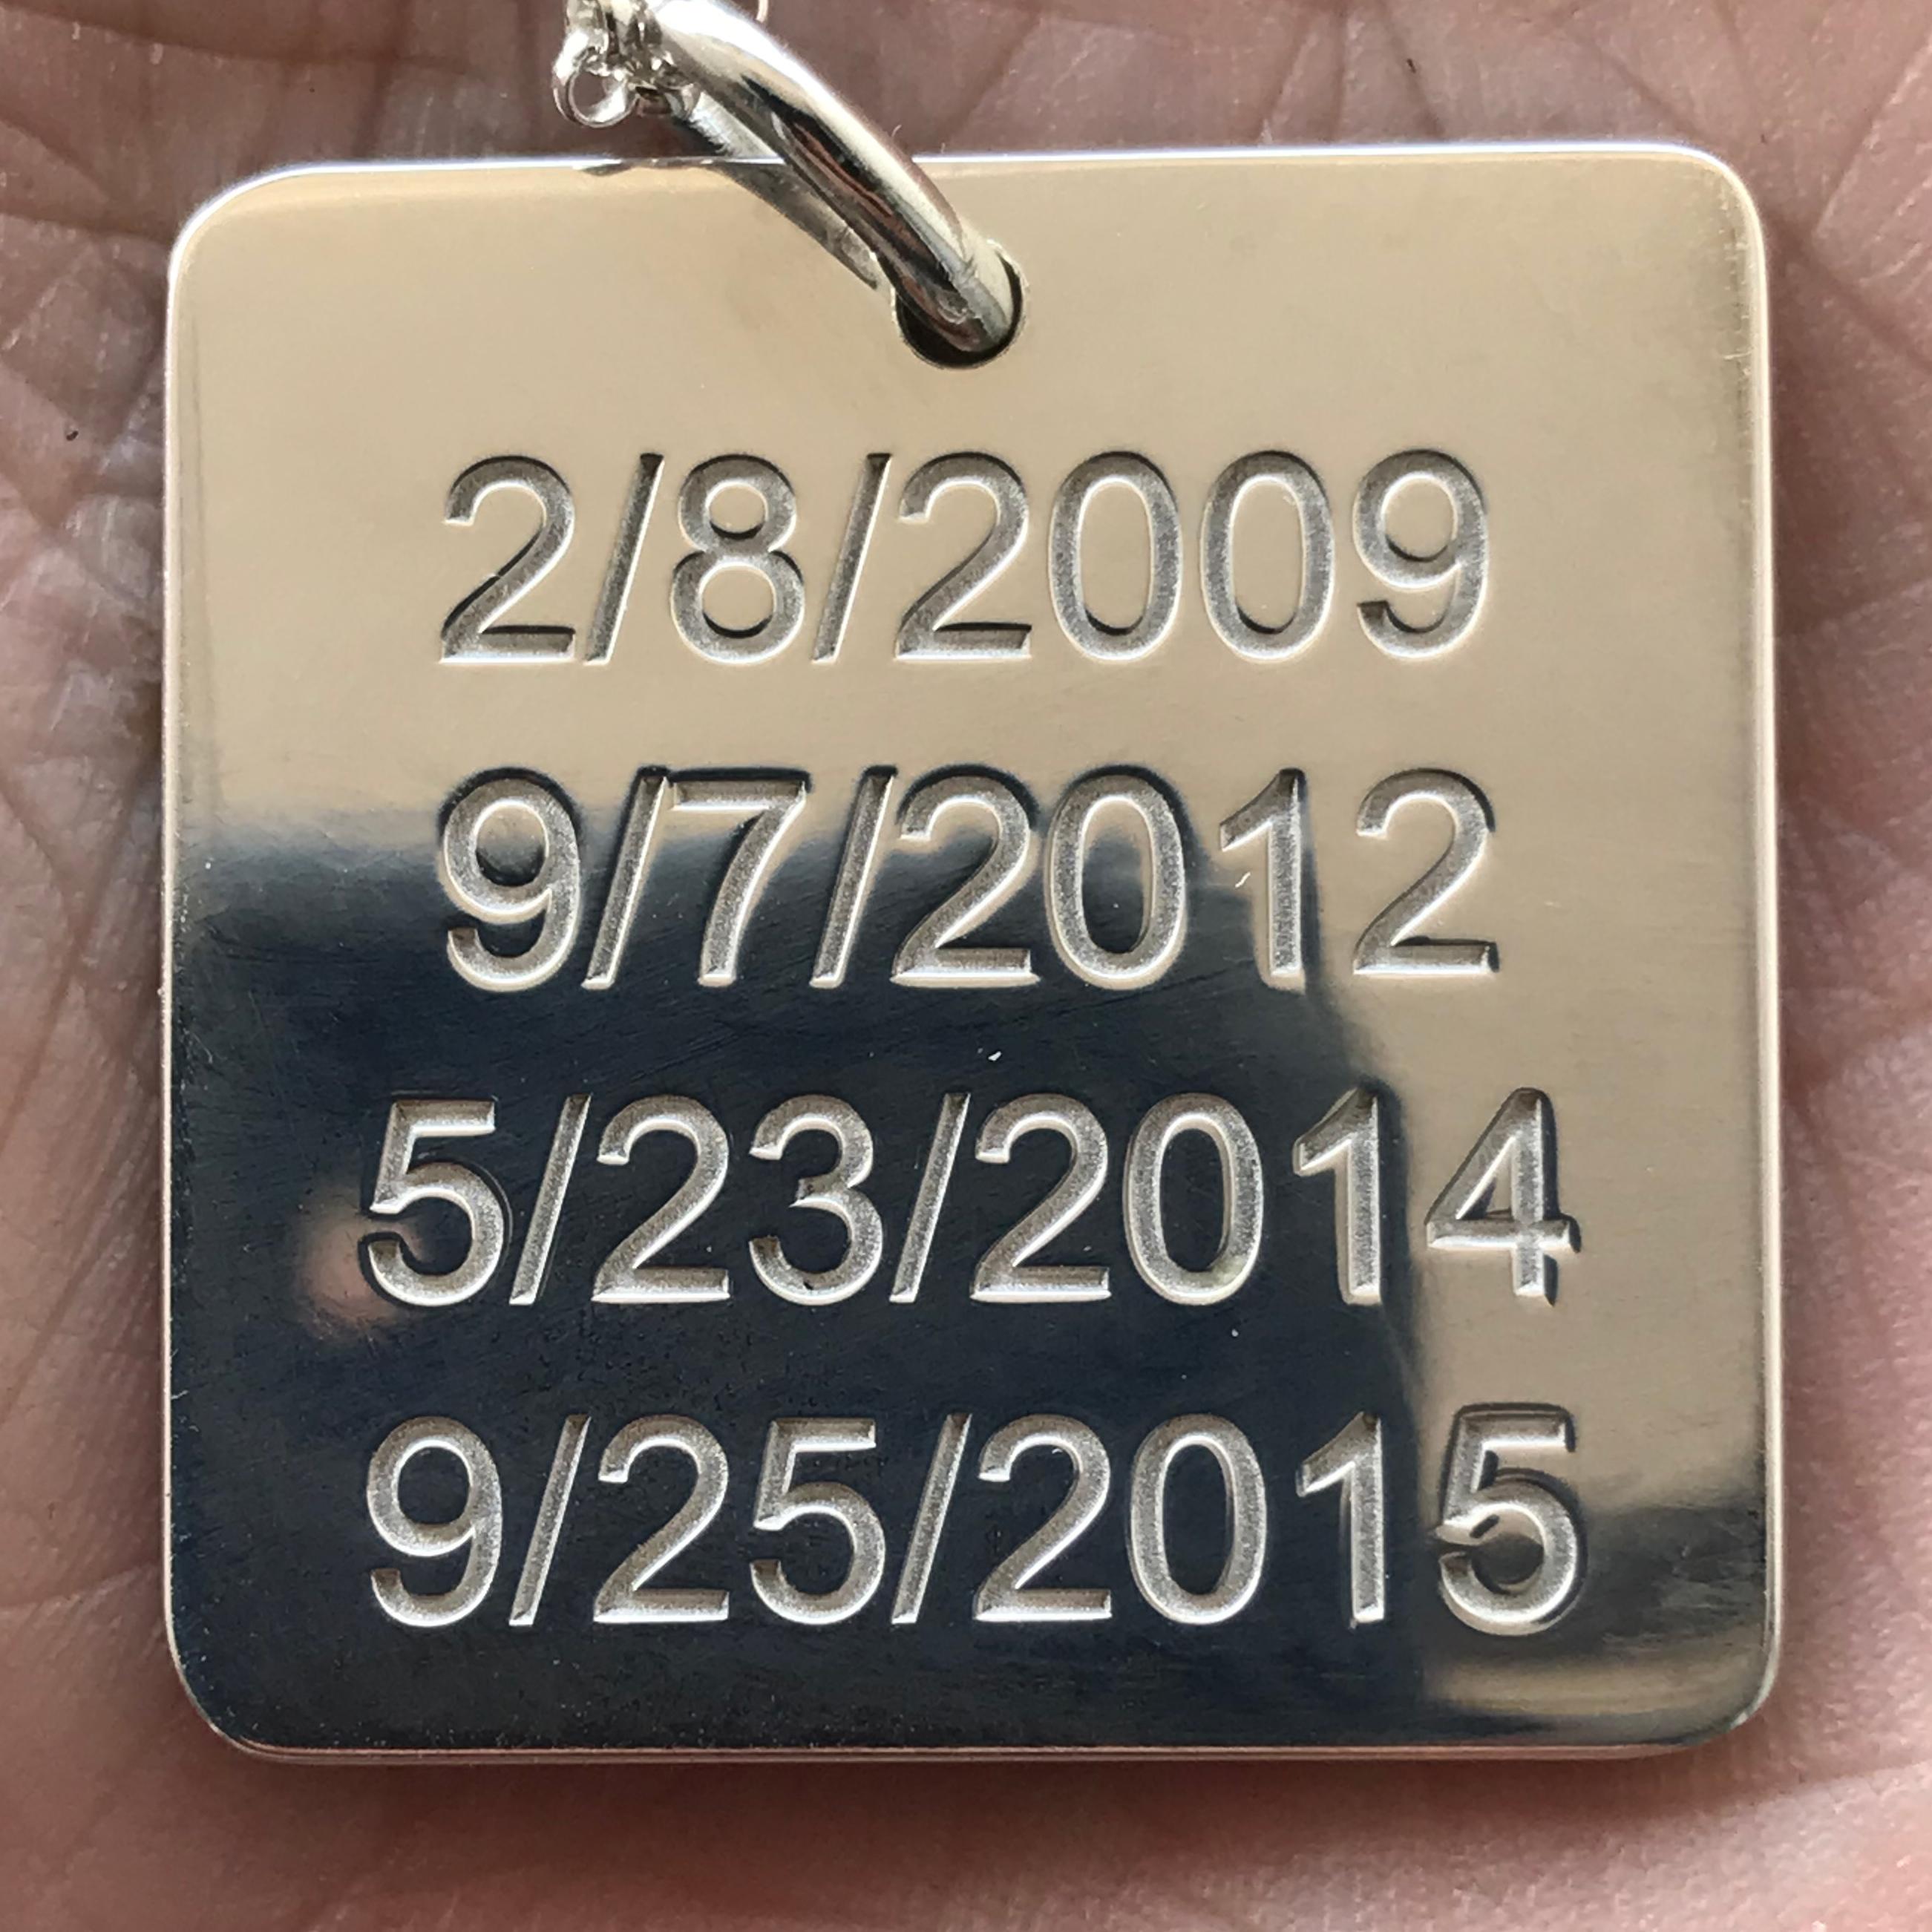 2000071

Dog Tags will be custom  made to order, please allow 1- 2 weeks from the time we have design approval from you.  but if you have a sooner delivery date needed let us know and we will see if we can accommodate you. We can engrave any names